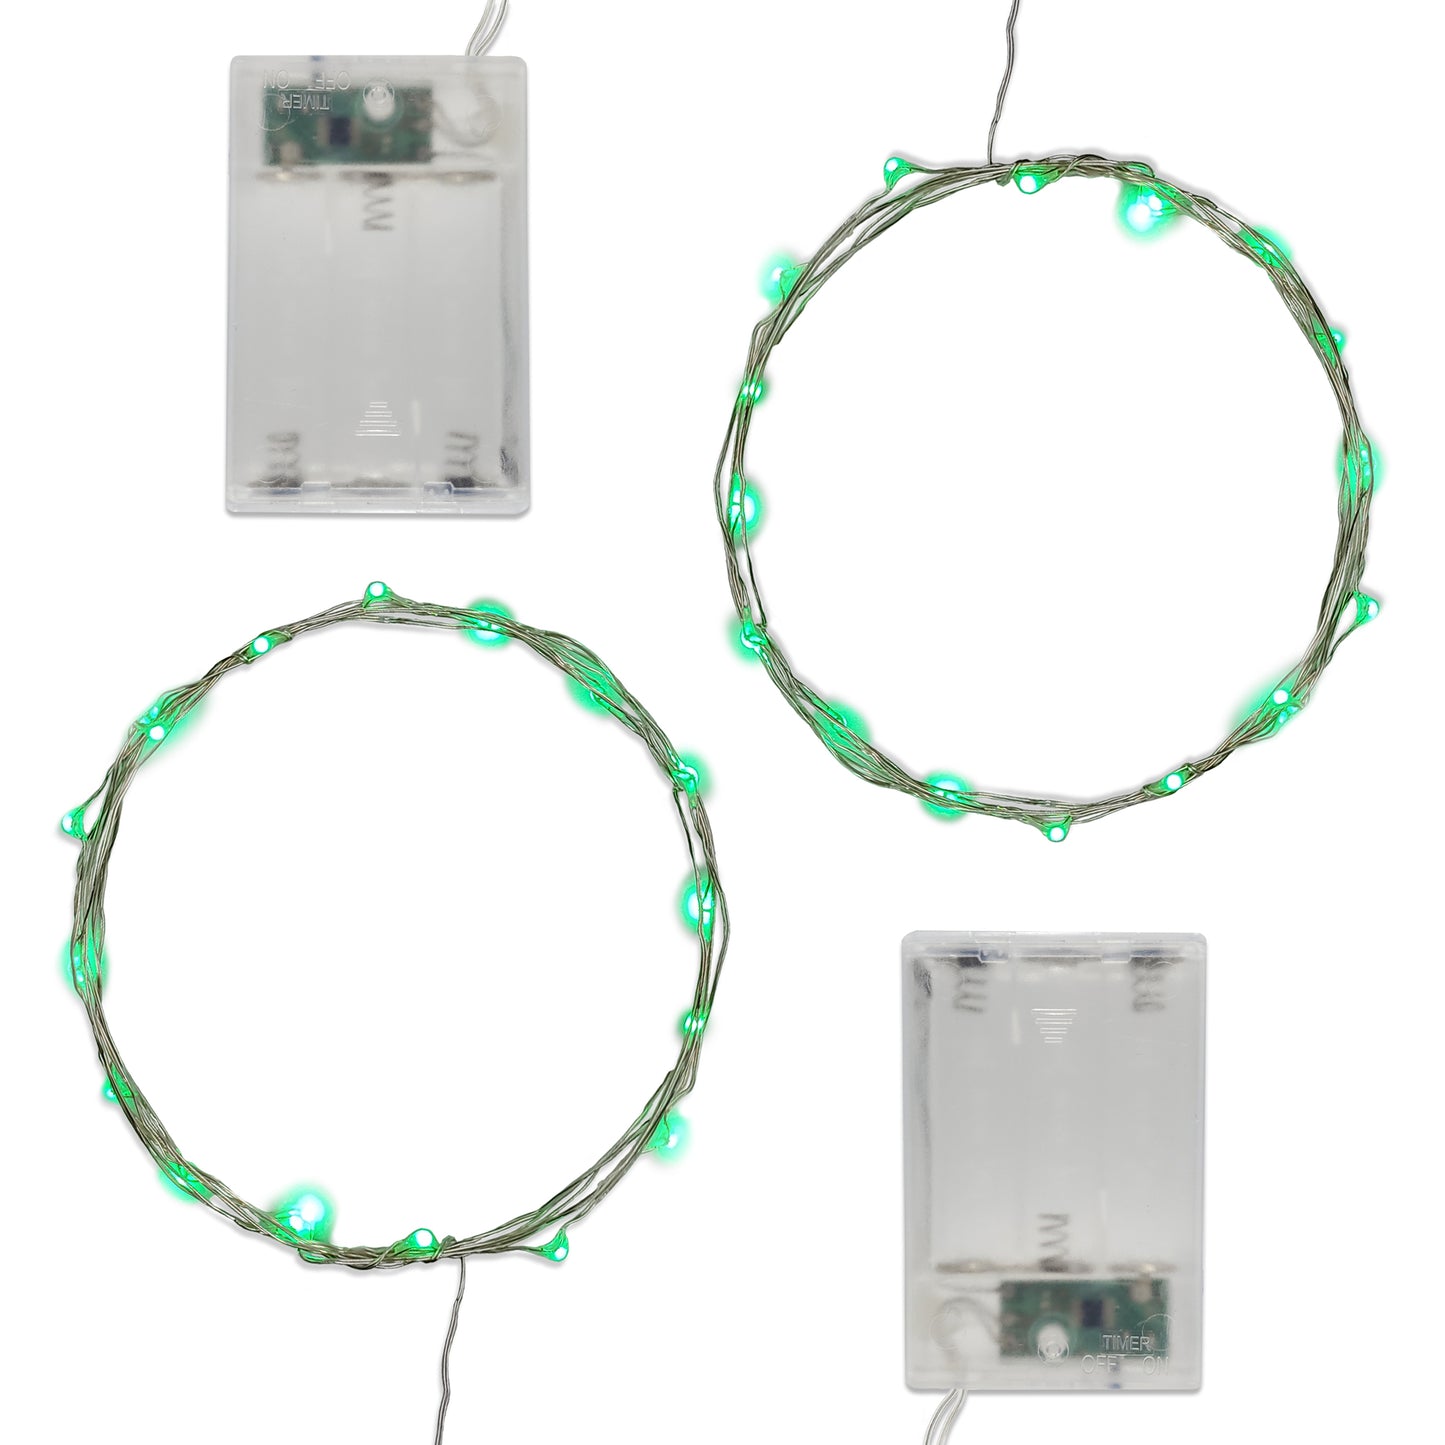 Battery Operated LED Fairy String Lights - Set of 2 - Green